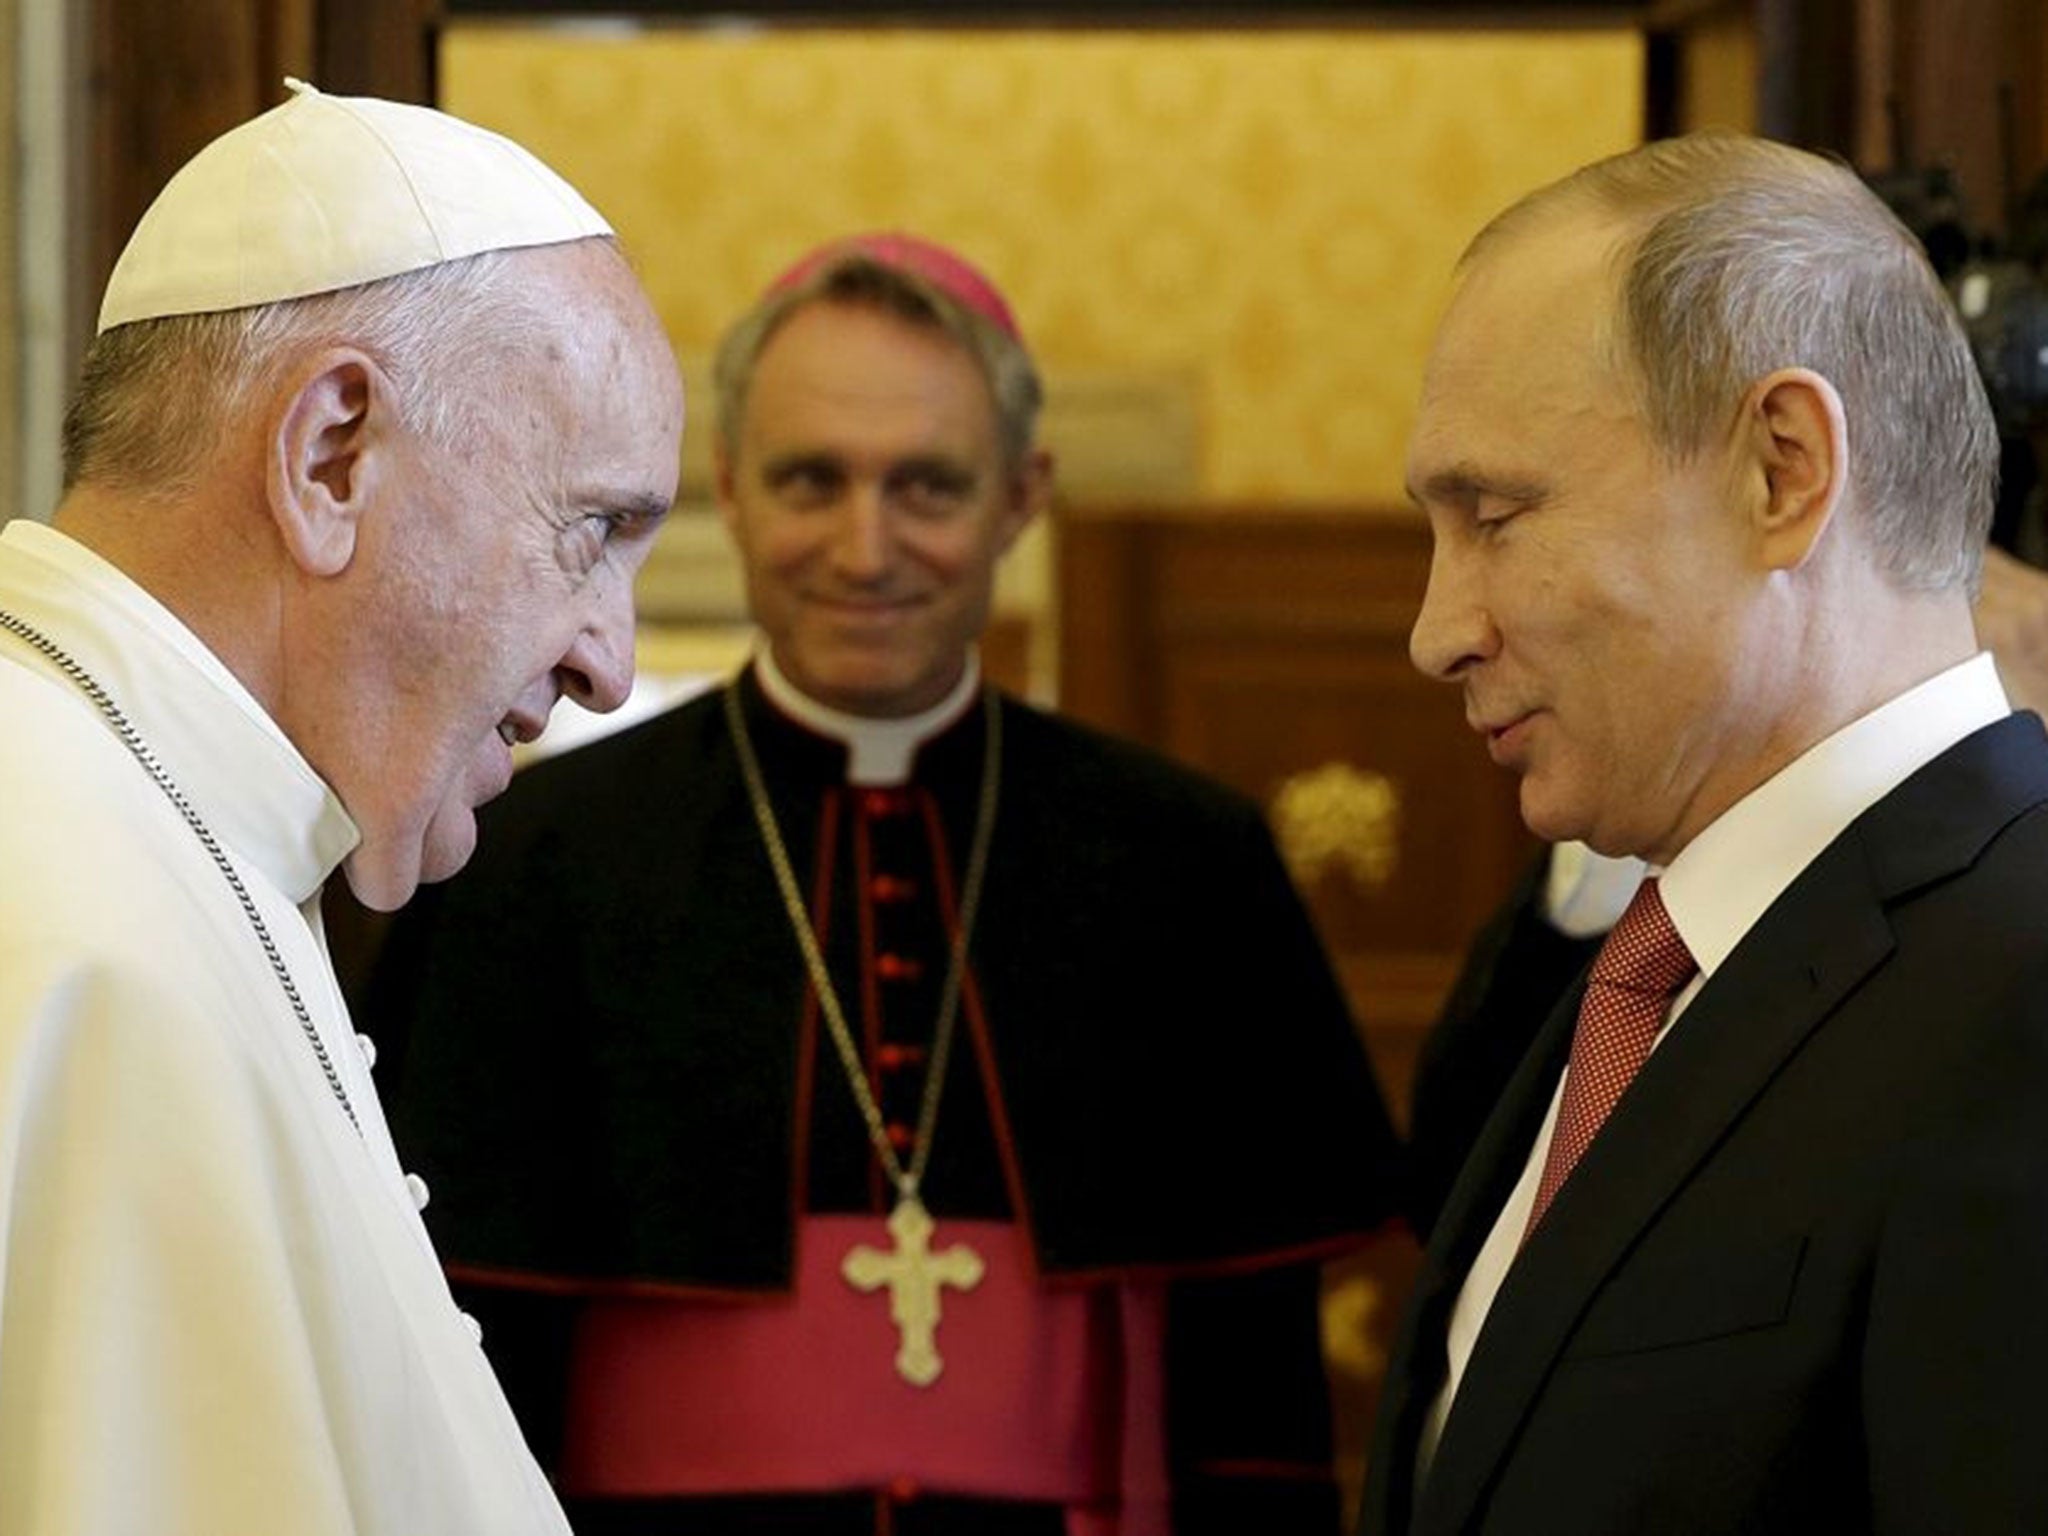 Russian President Vladimir Putin (R) meets Pope Francis during a private meeting at Vatican City, June 10, 2015. The United States urged the Vatican on Wednesday to criticise Russia's involvement in the Ukraine conflict more forcefully, hours before Pope